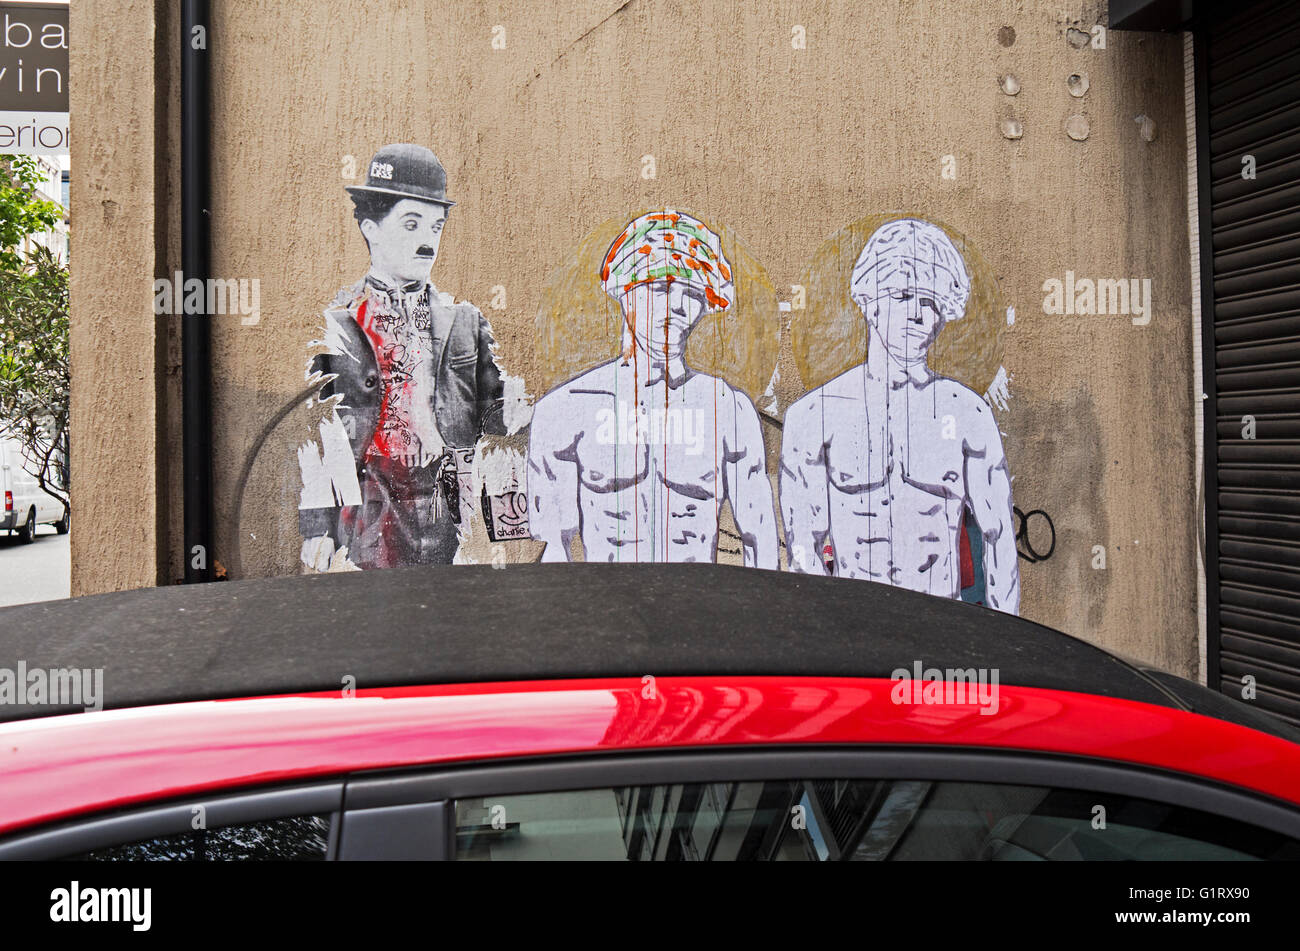 Street art graffiti seen over the top of a car roof. Stock Photo